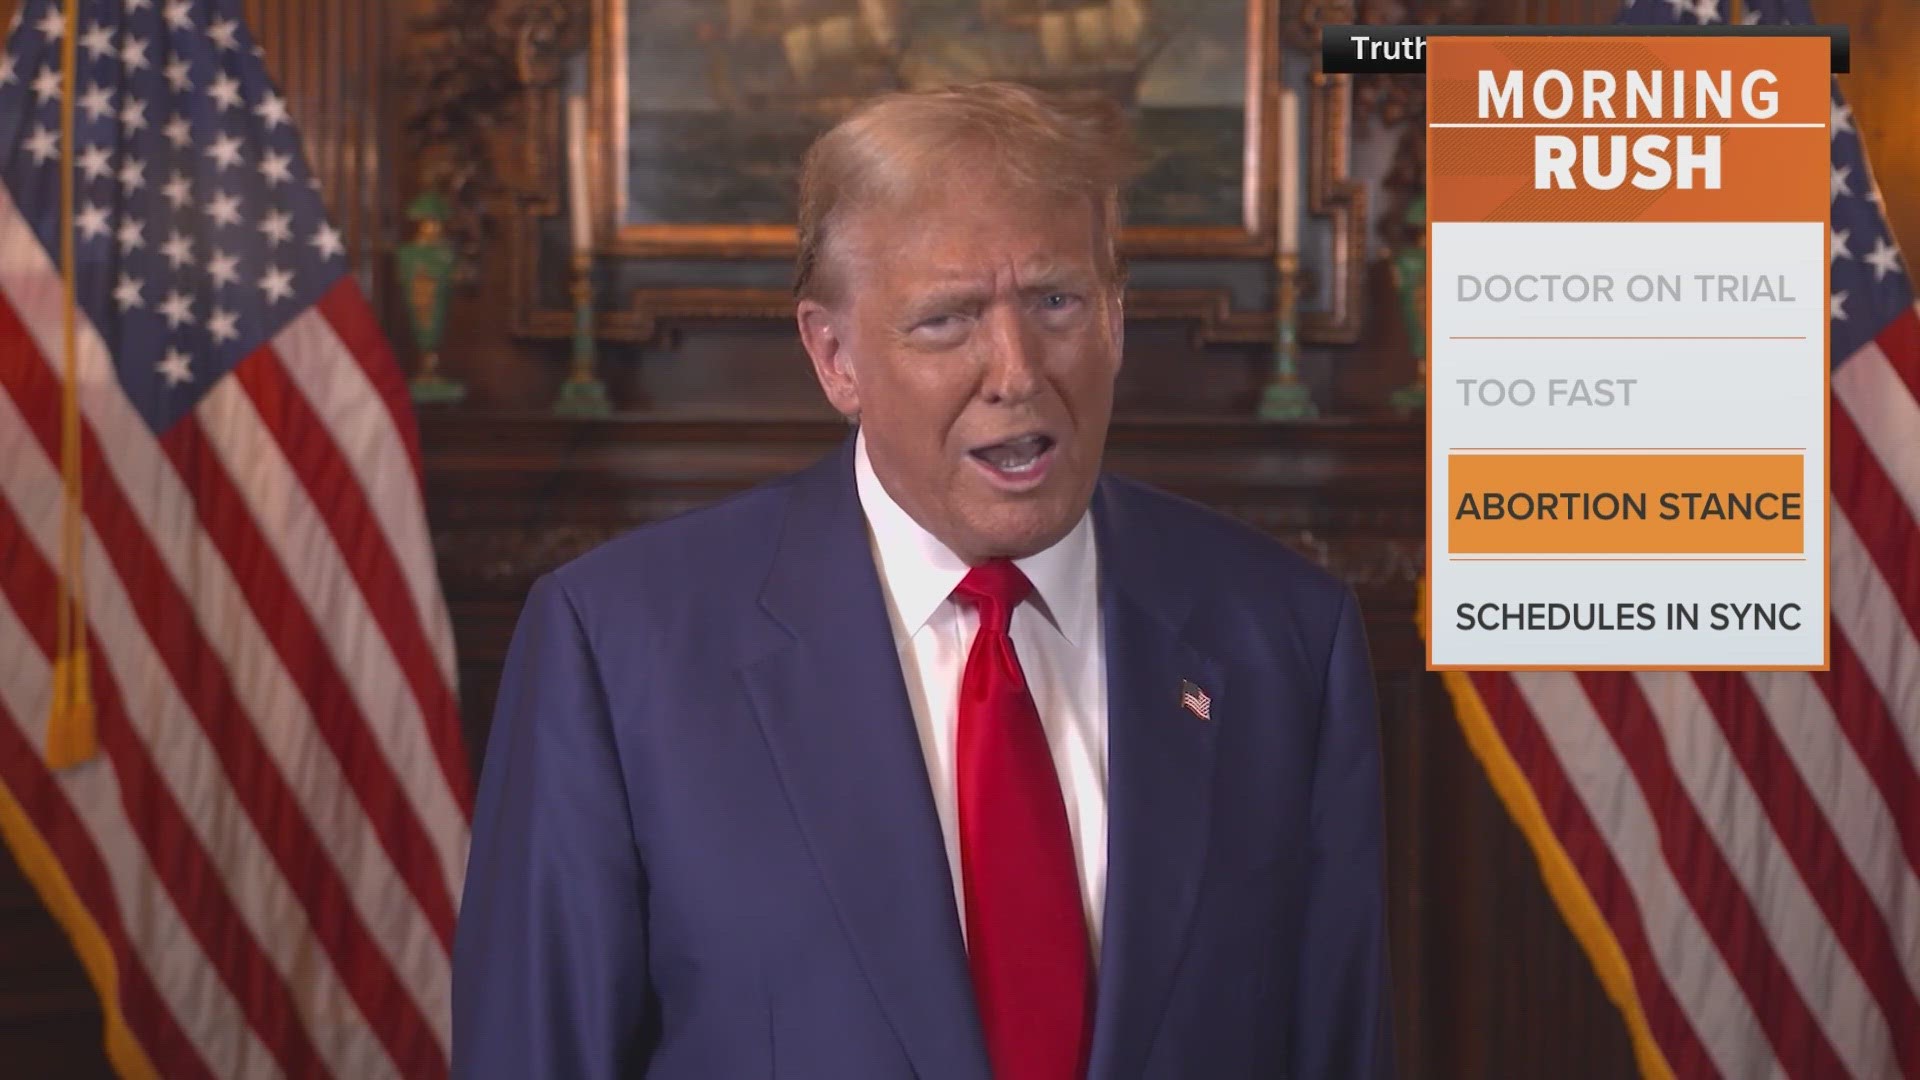 In a video posted to Truth Social, Trump said he believes abortion rights should be left up to the states.